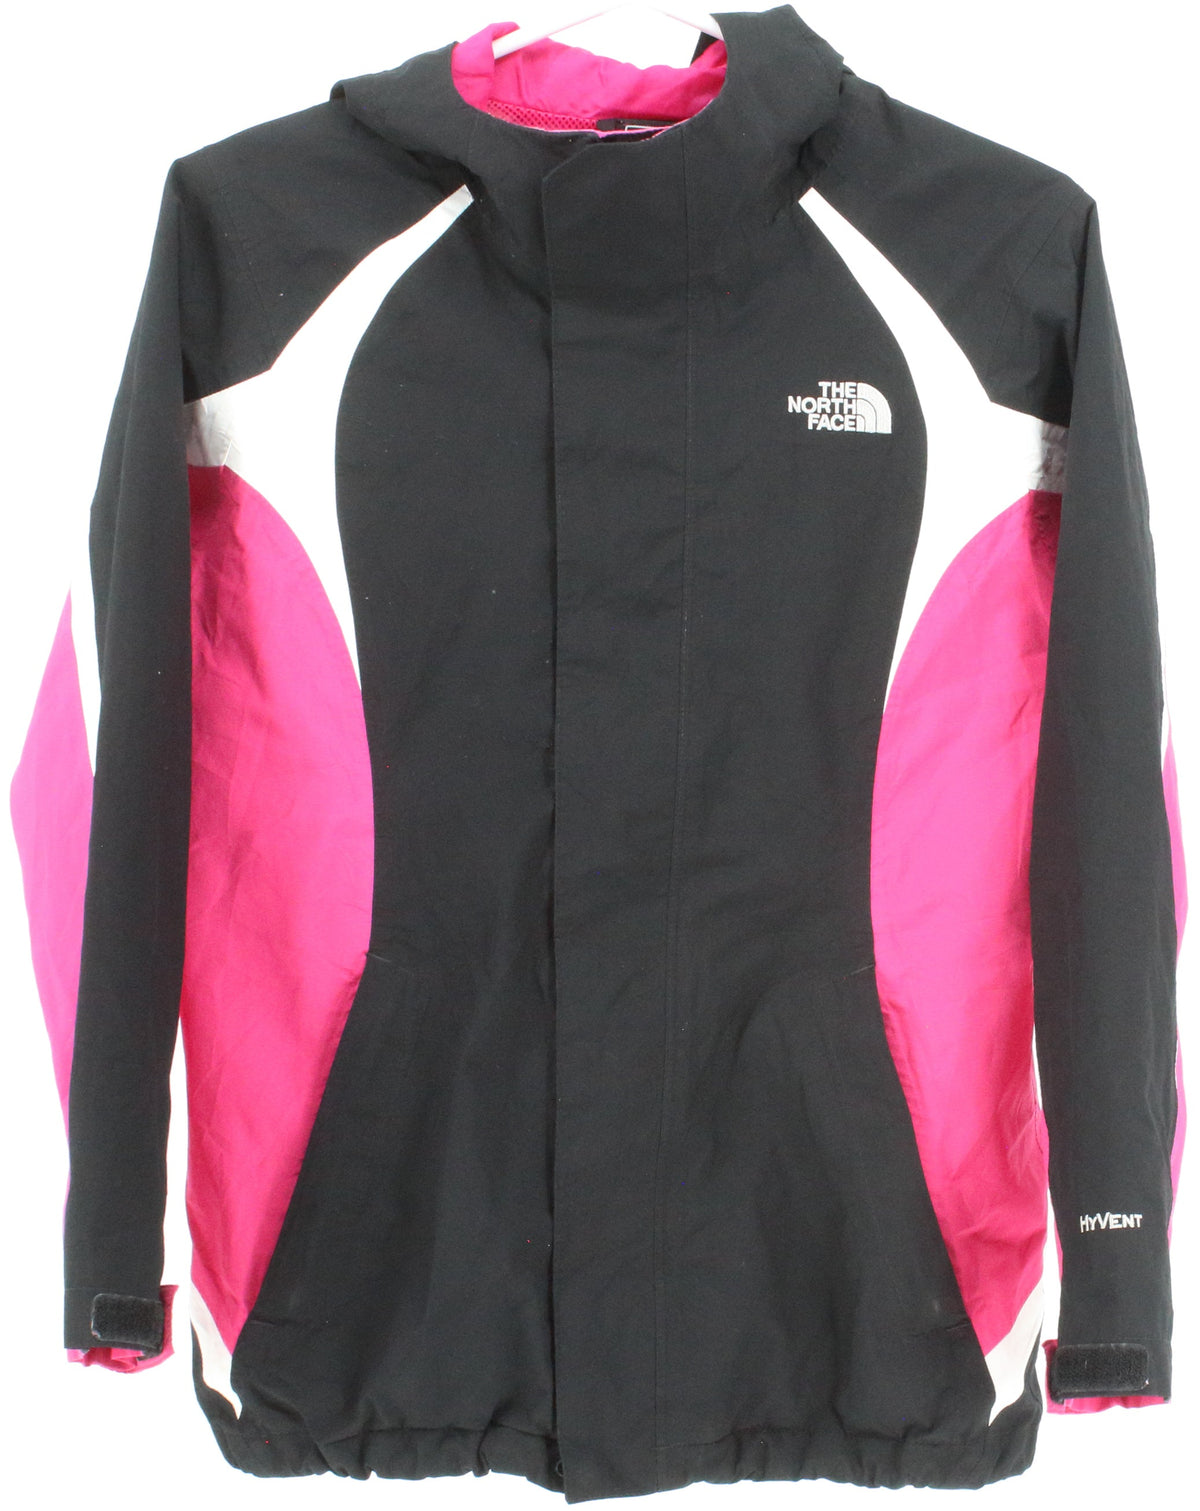 The North Face HyVent Black Pink and White Girl's Jacket